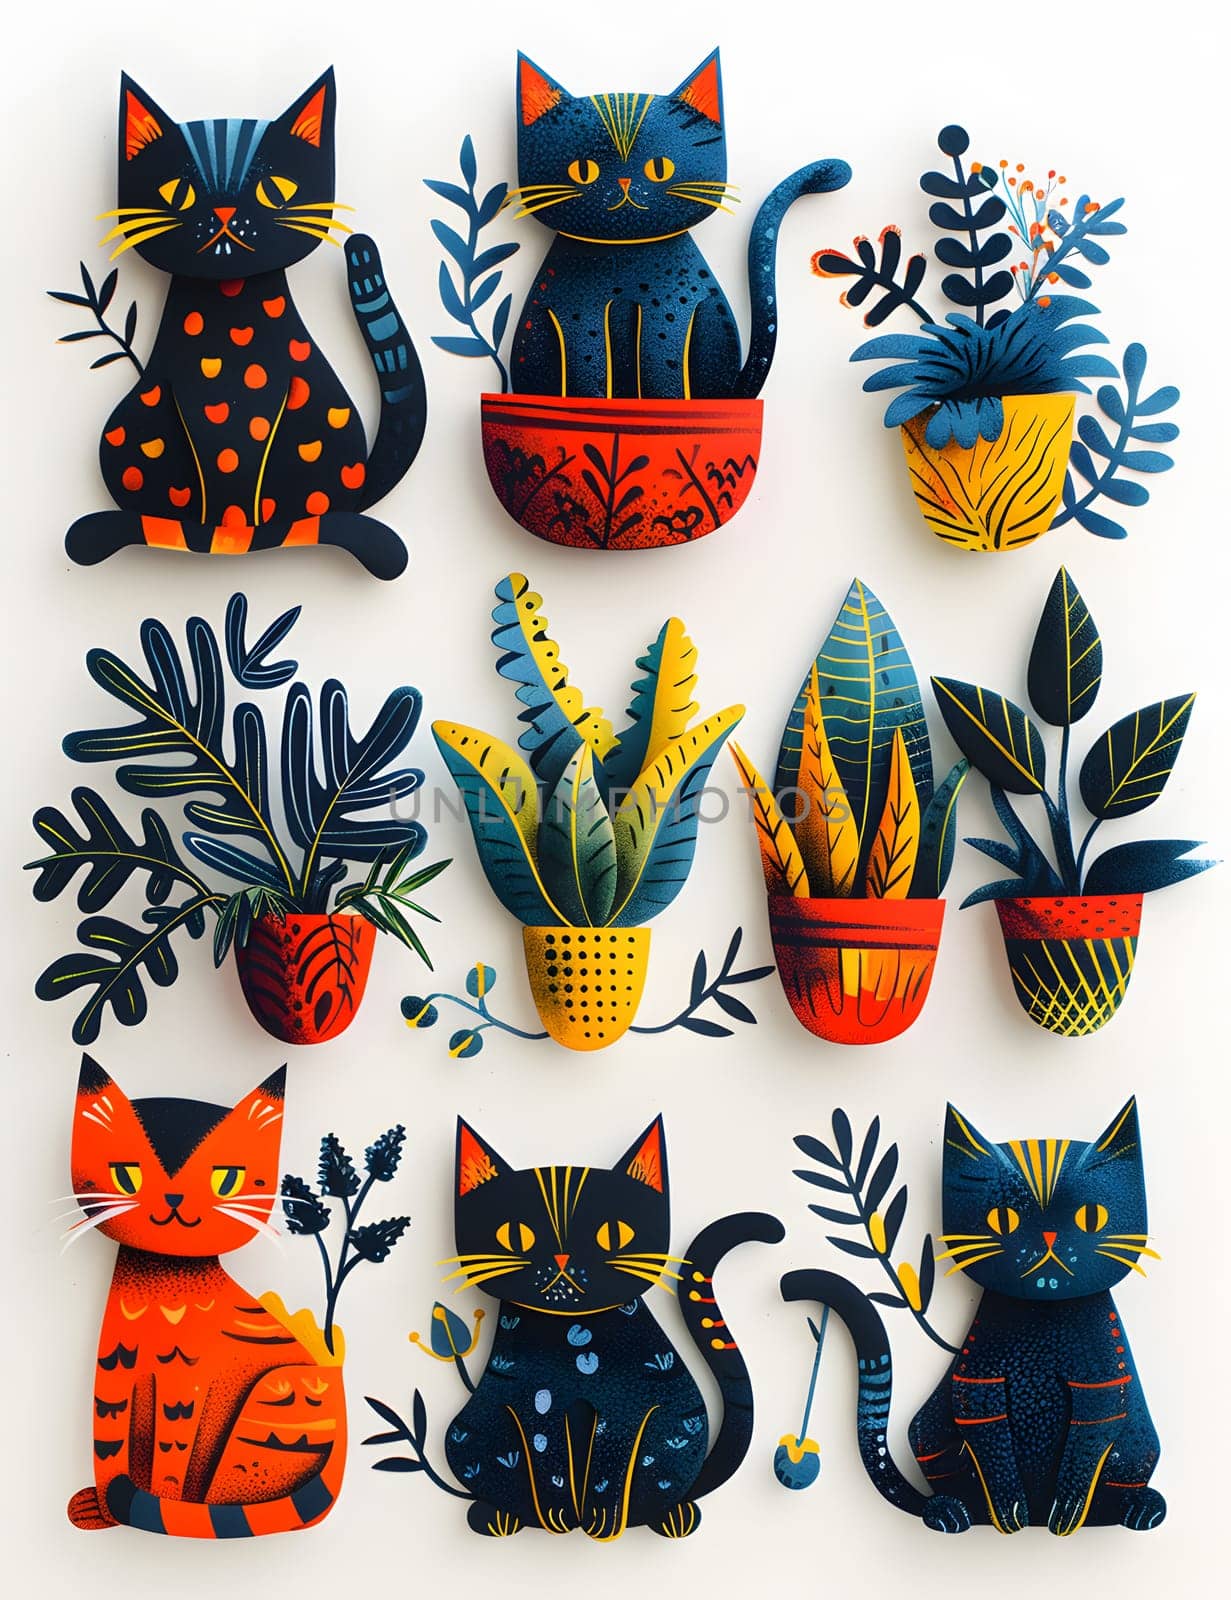 Felidae cats and potted plants painted on white canvas by Nadtochiy